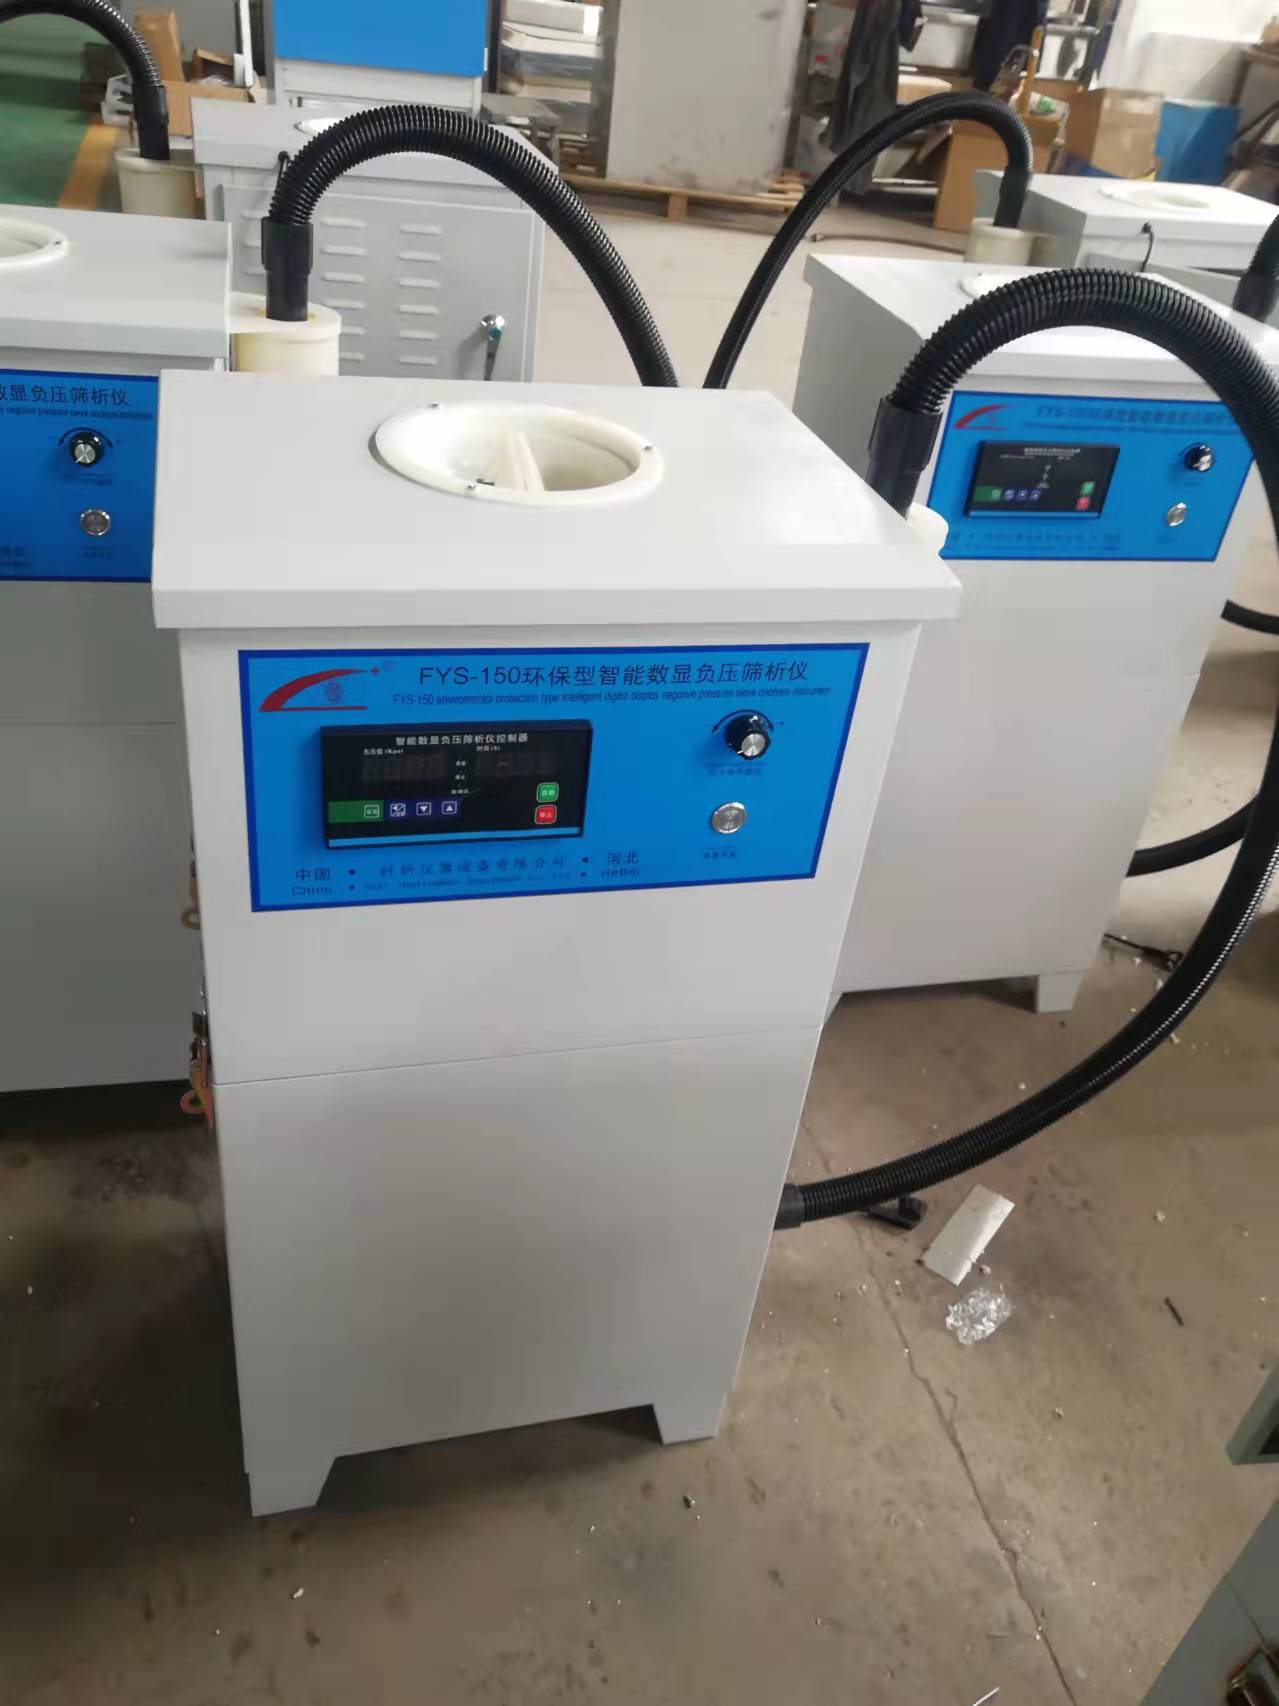 Efficient Electric Heating Water Distiller for Purifying Water at Home